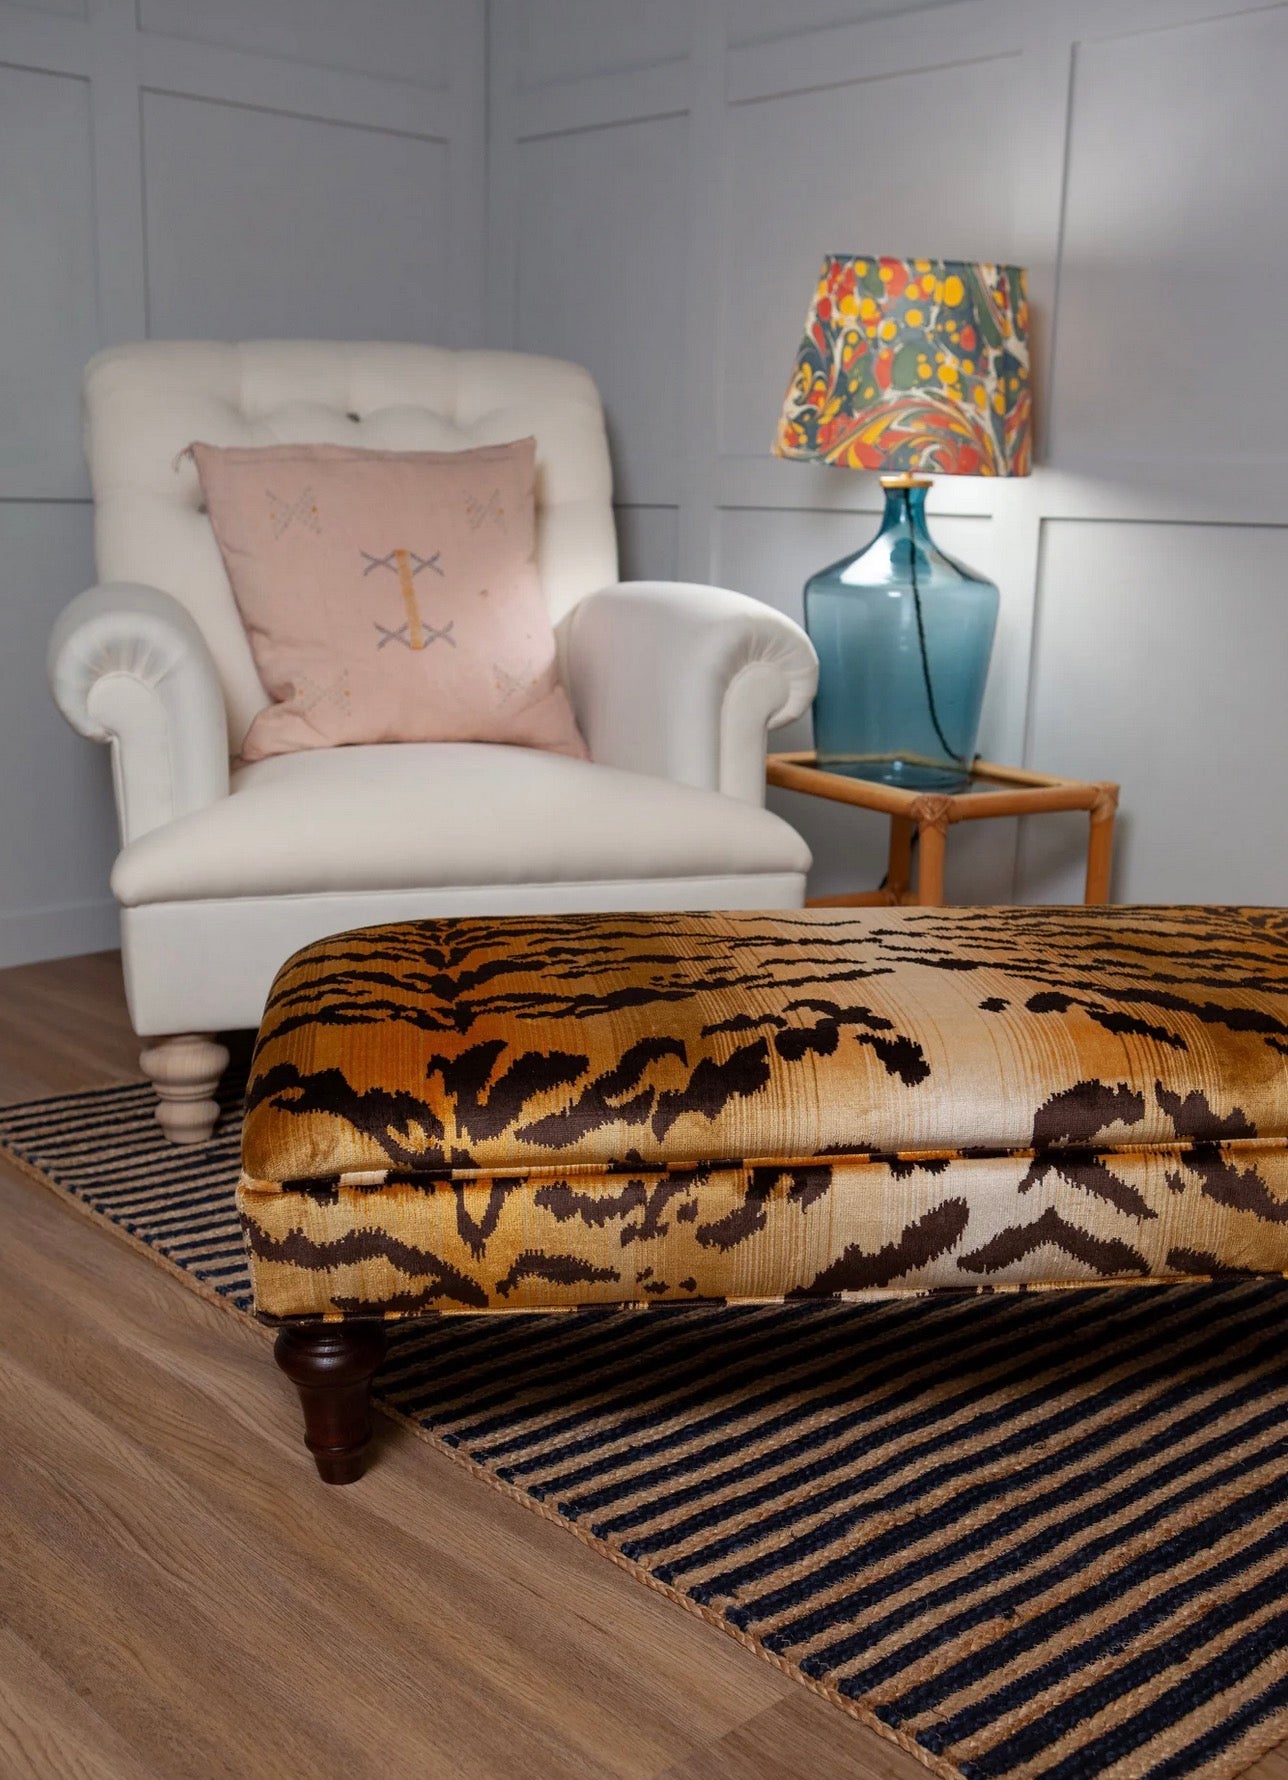 Bespoke Bryher Ottoman Footstool In Any Fabric